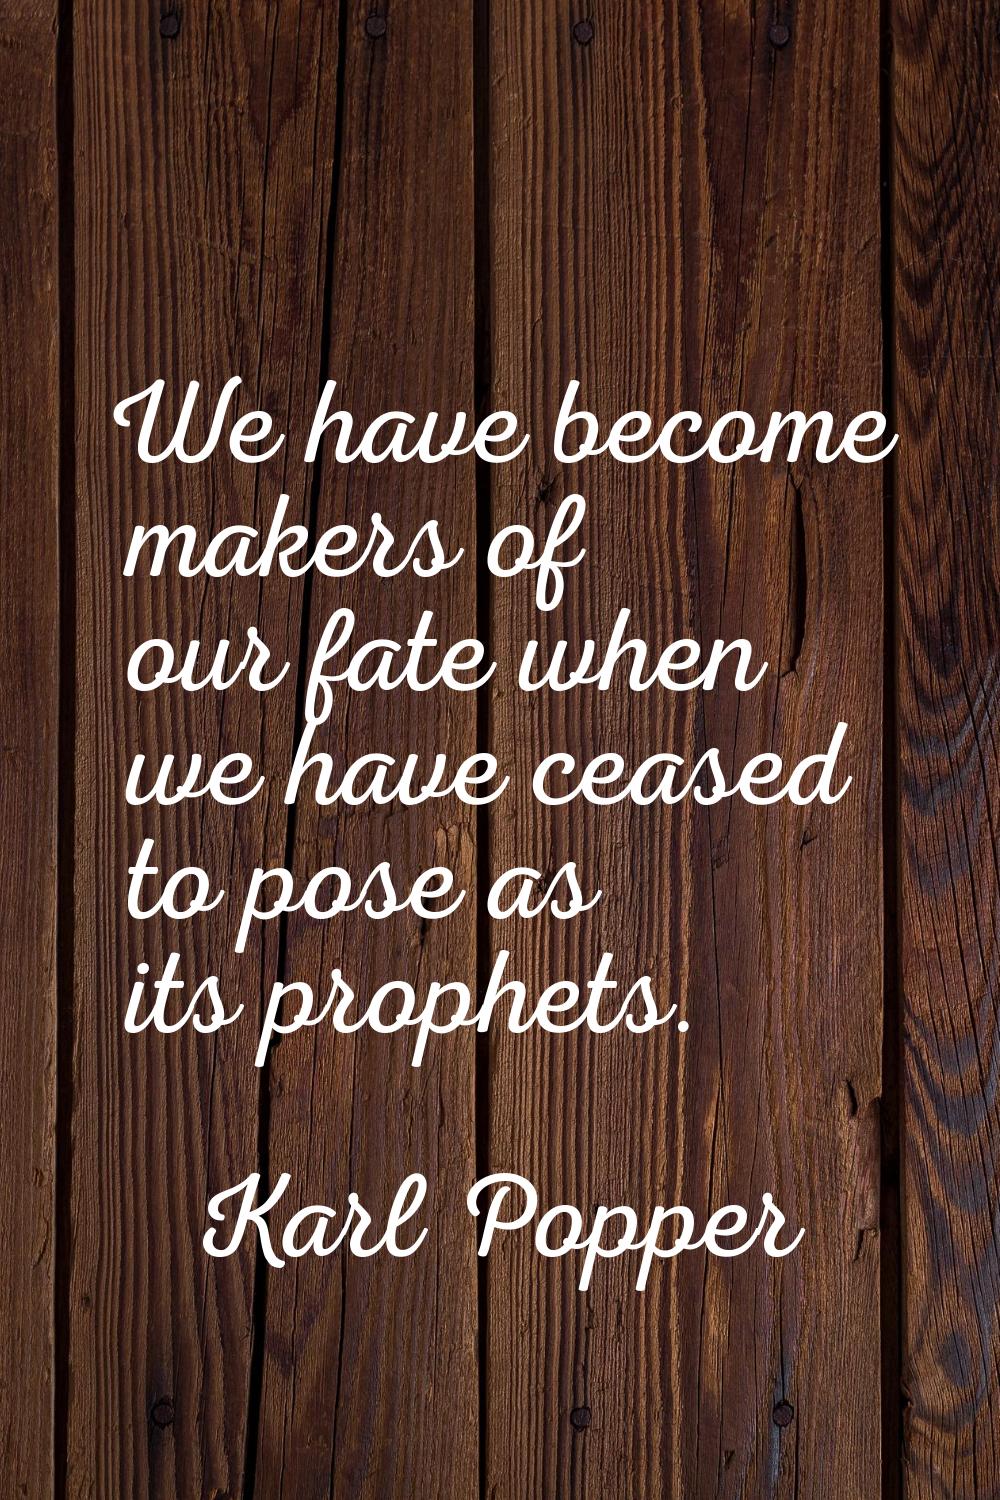 We have become makers of our fate when we have ceased to pose as its prophets.